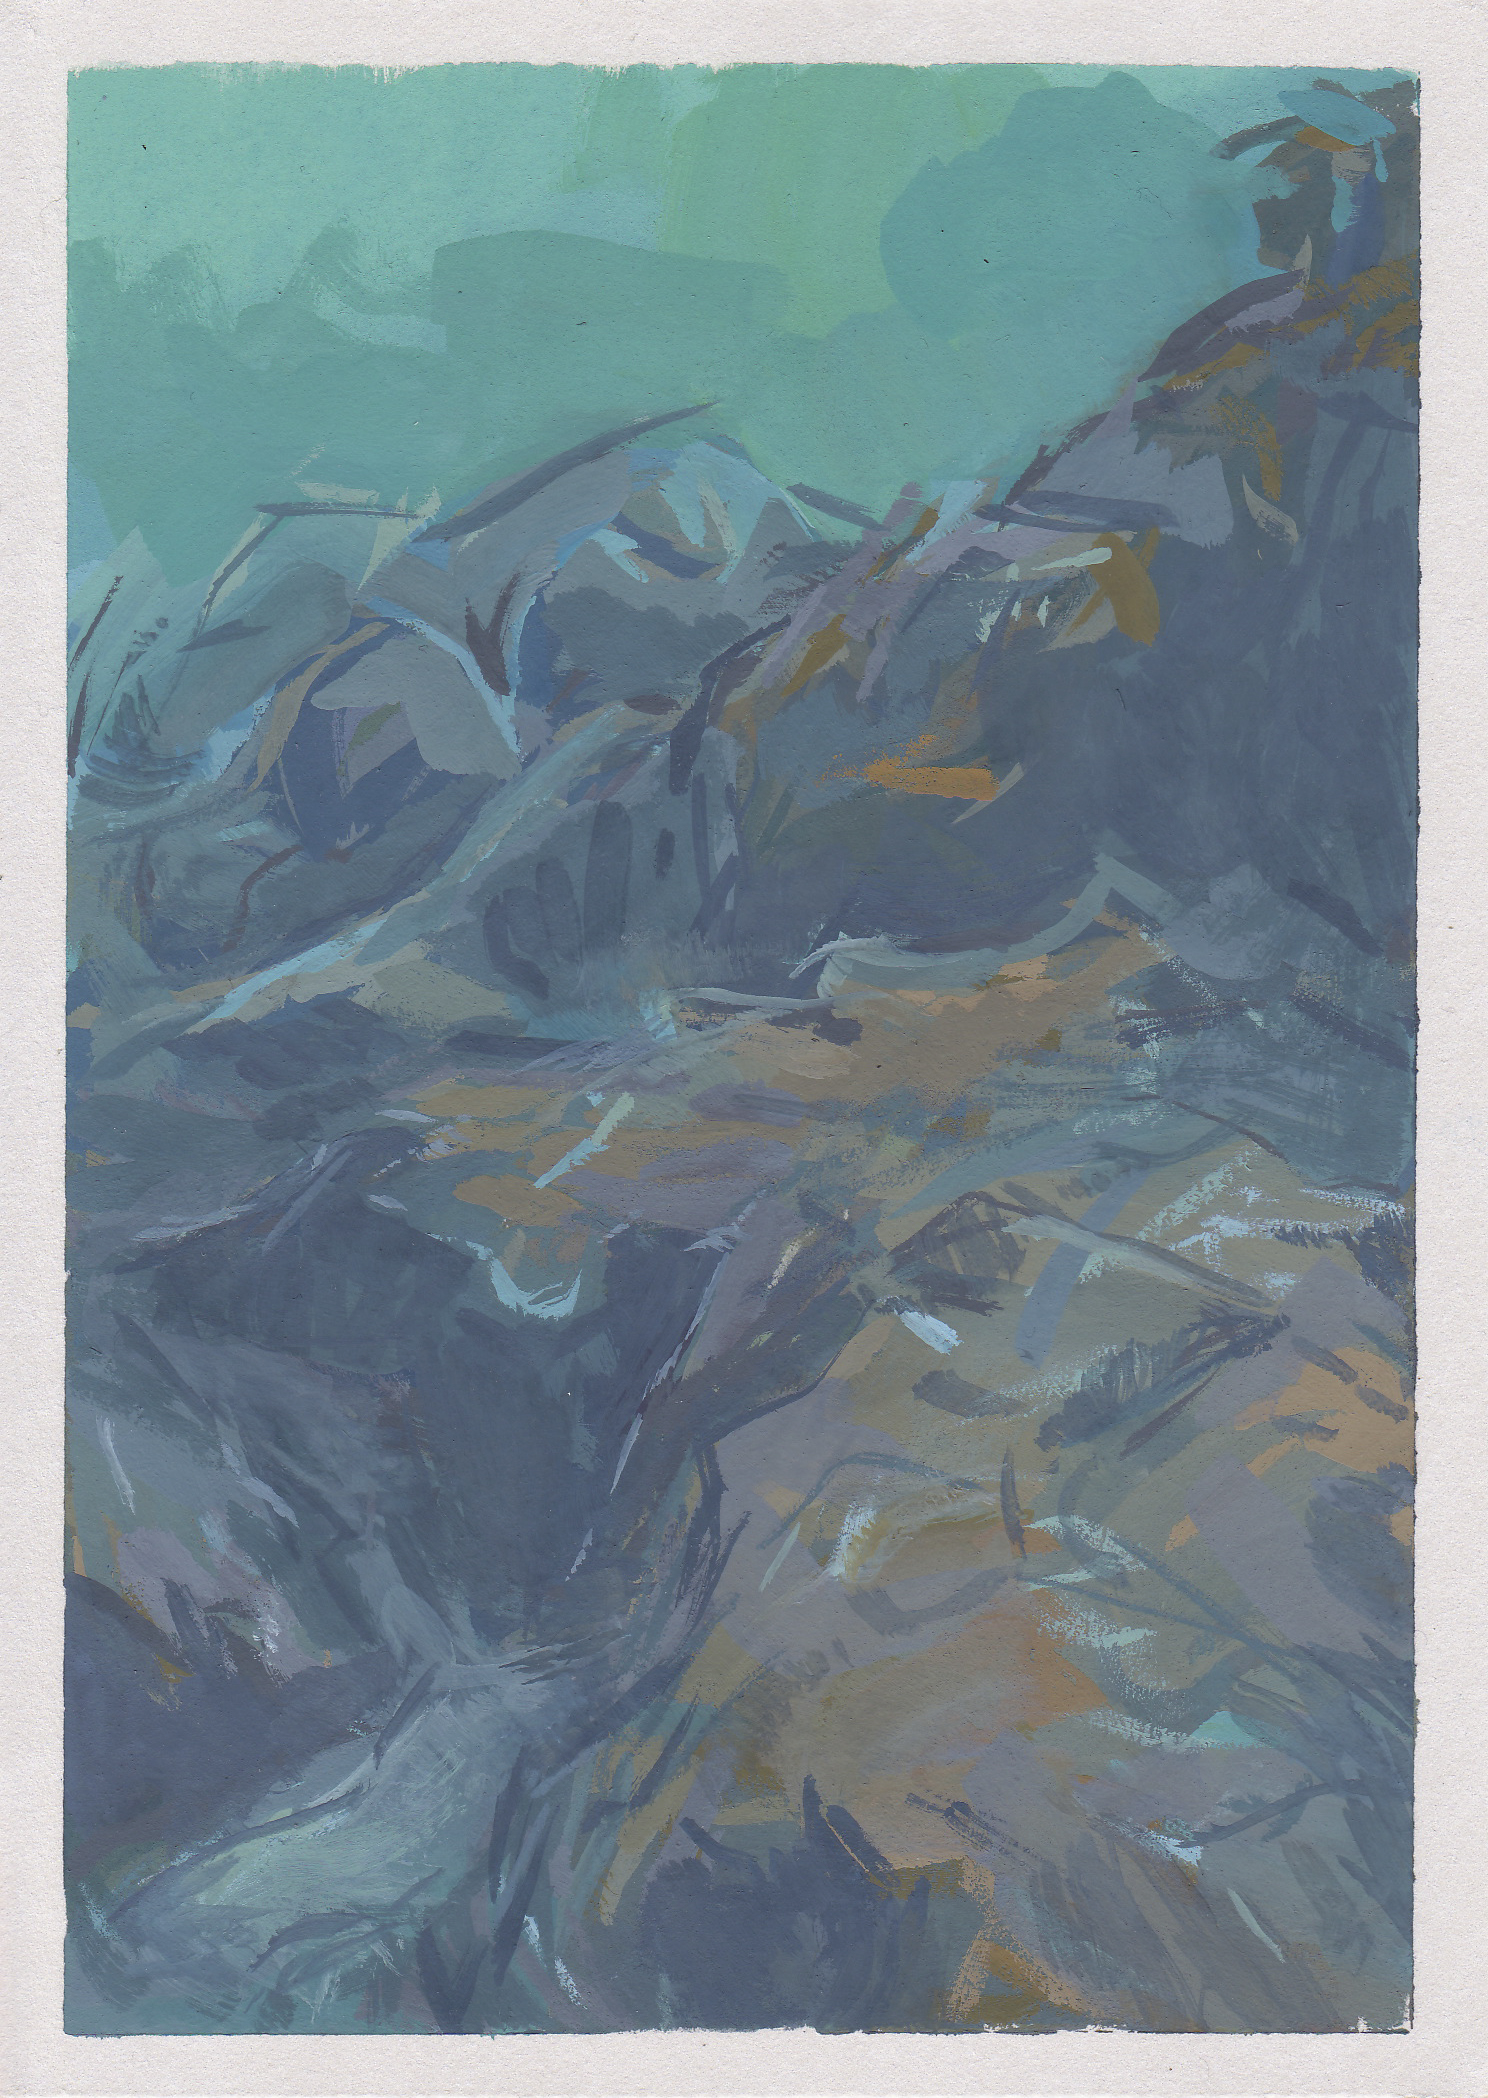    seascape II     gouache on paper 4.5x6.5" 2013  collection of the artist  purchase prints  